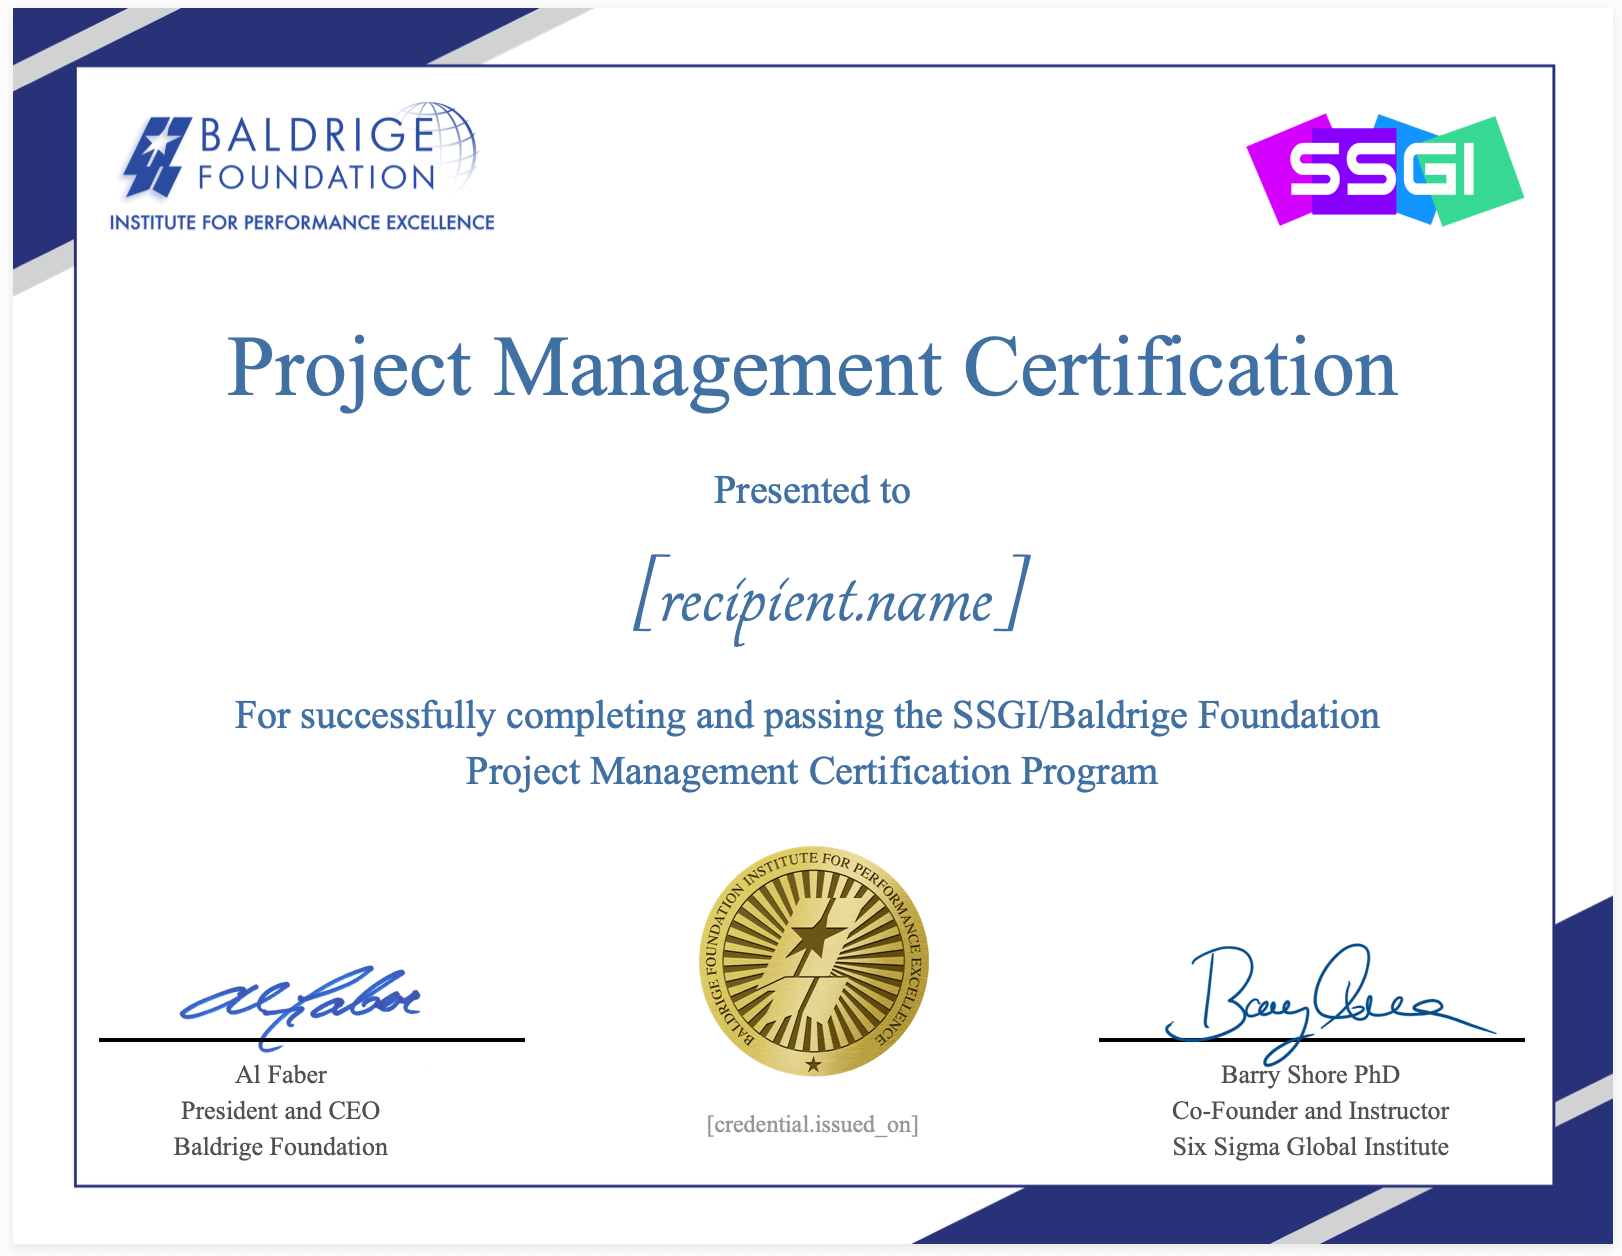 pmp certified